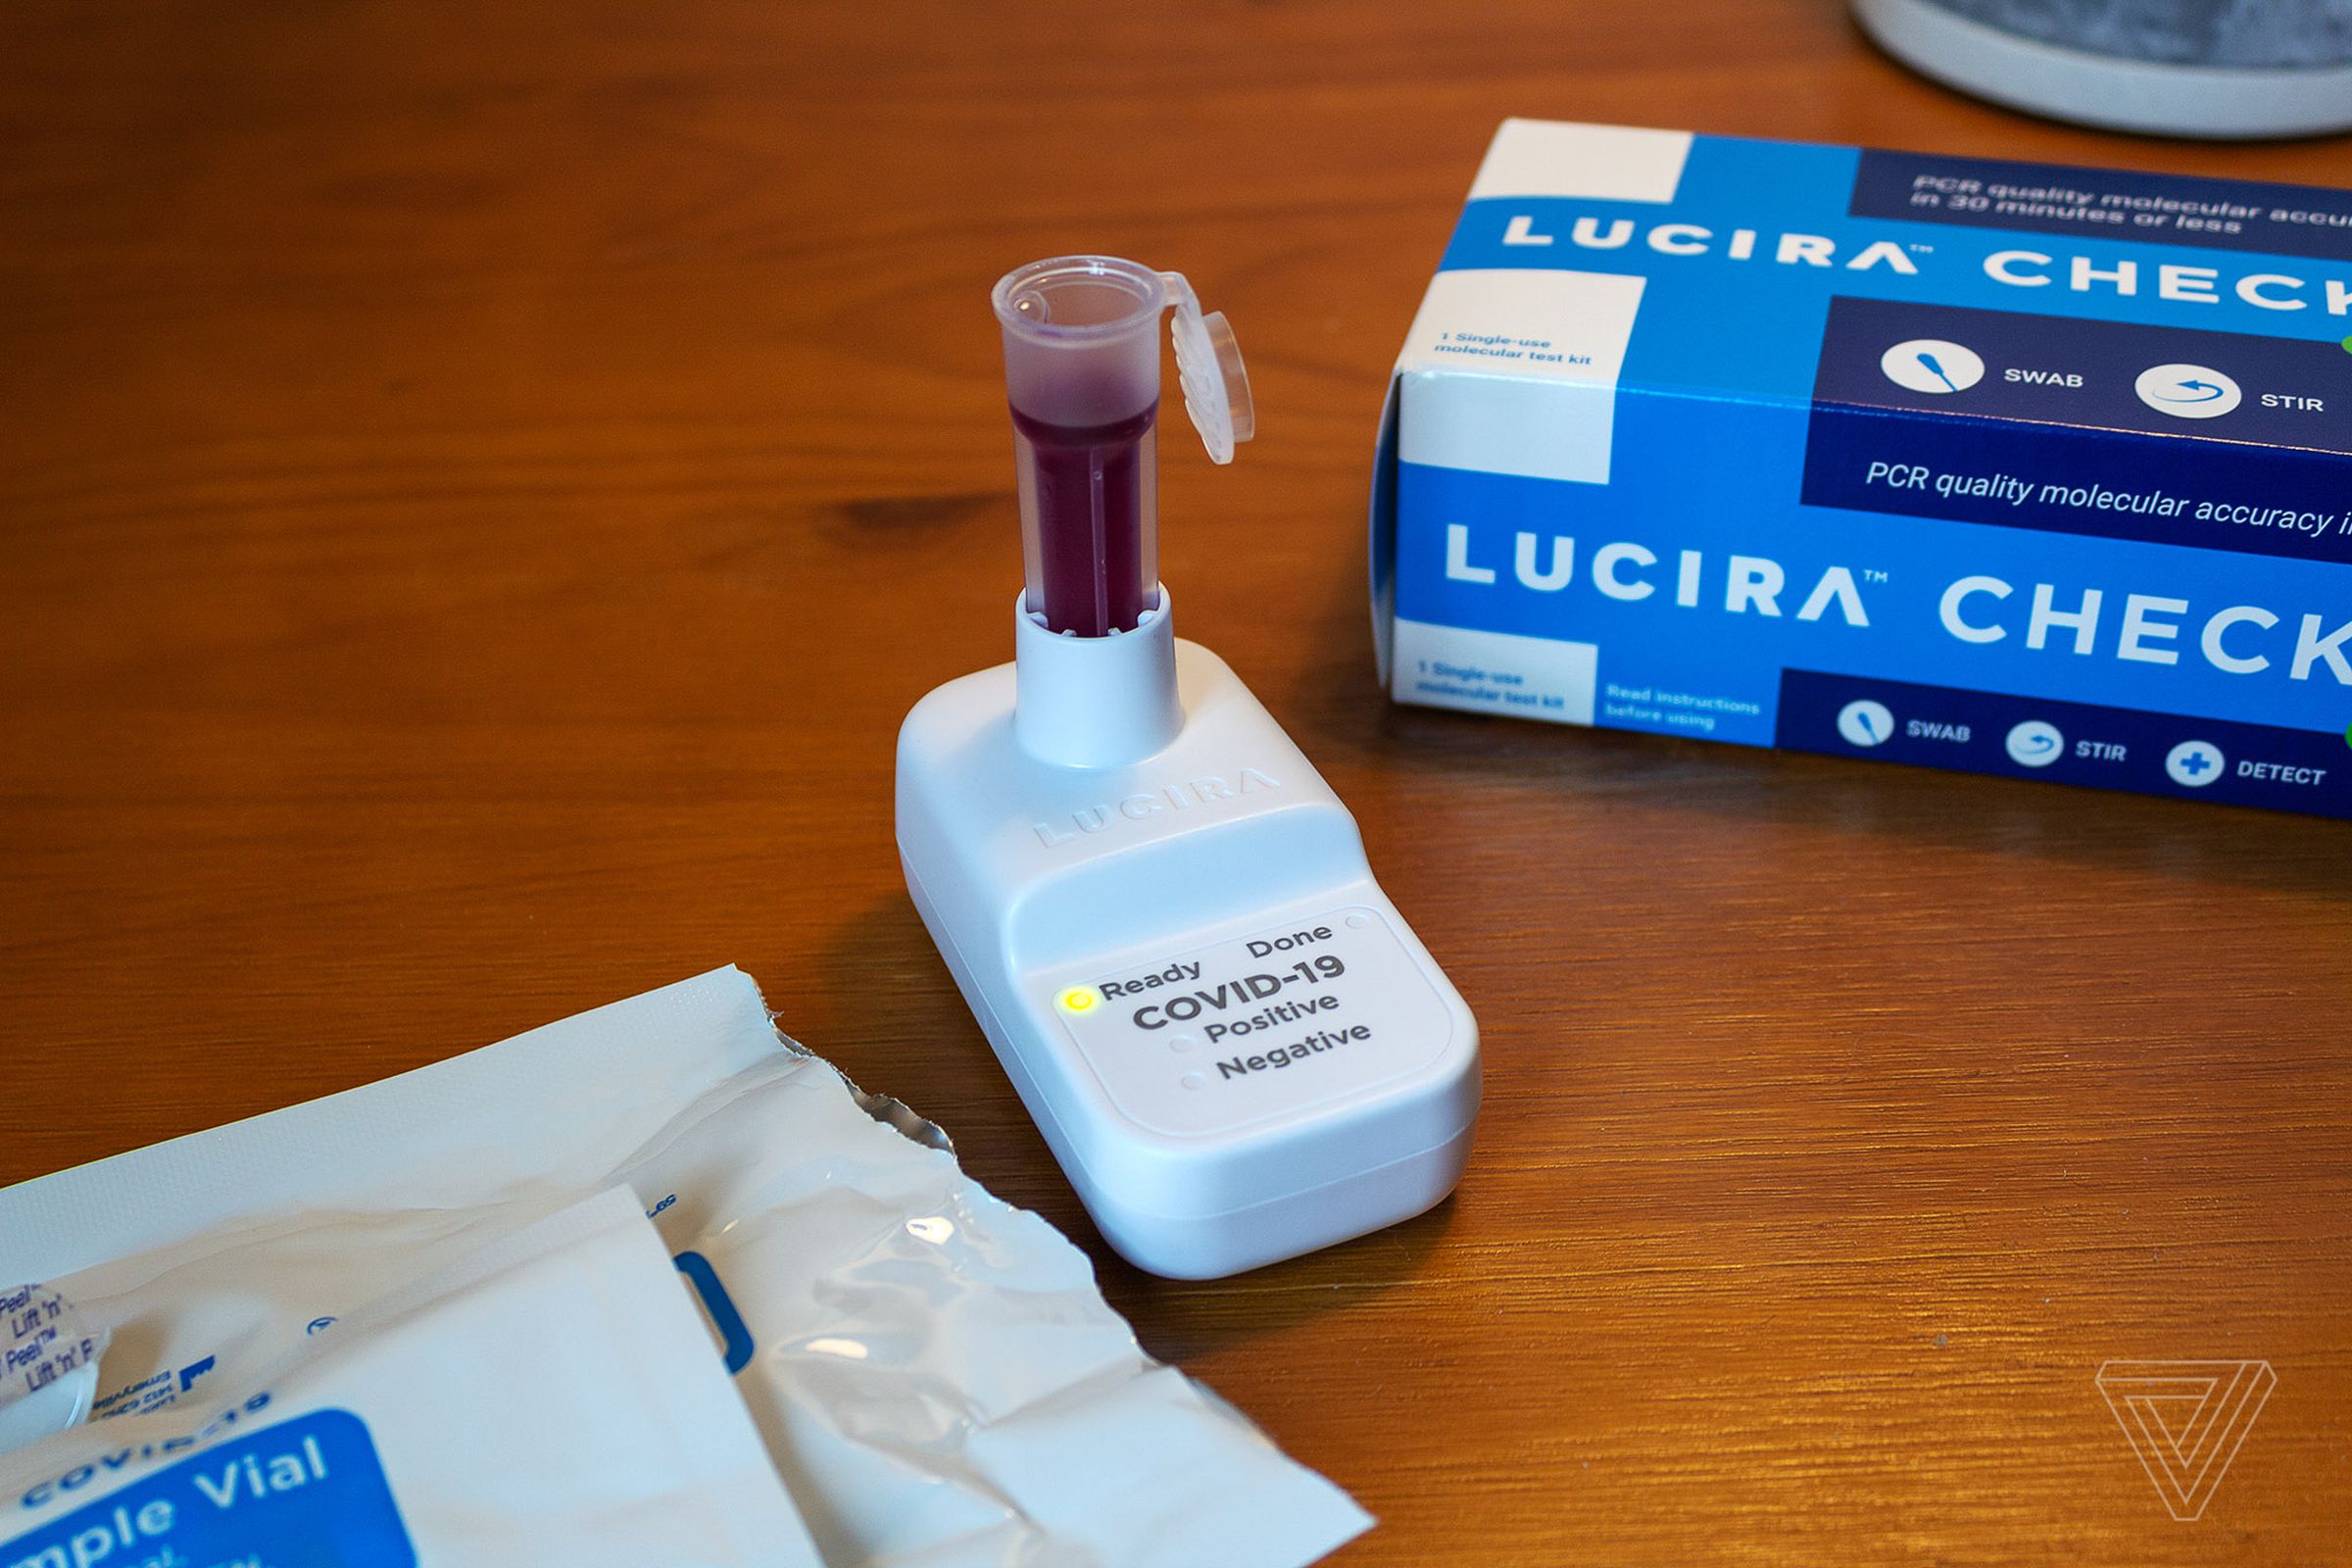 Lucira’s test is meant to be one-time use only and works without a smartphone app.